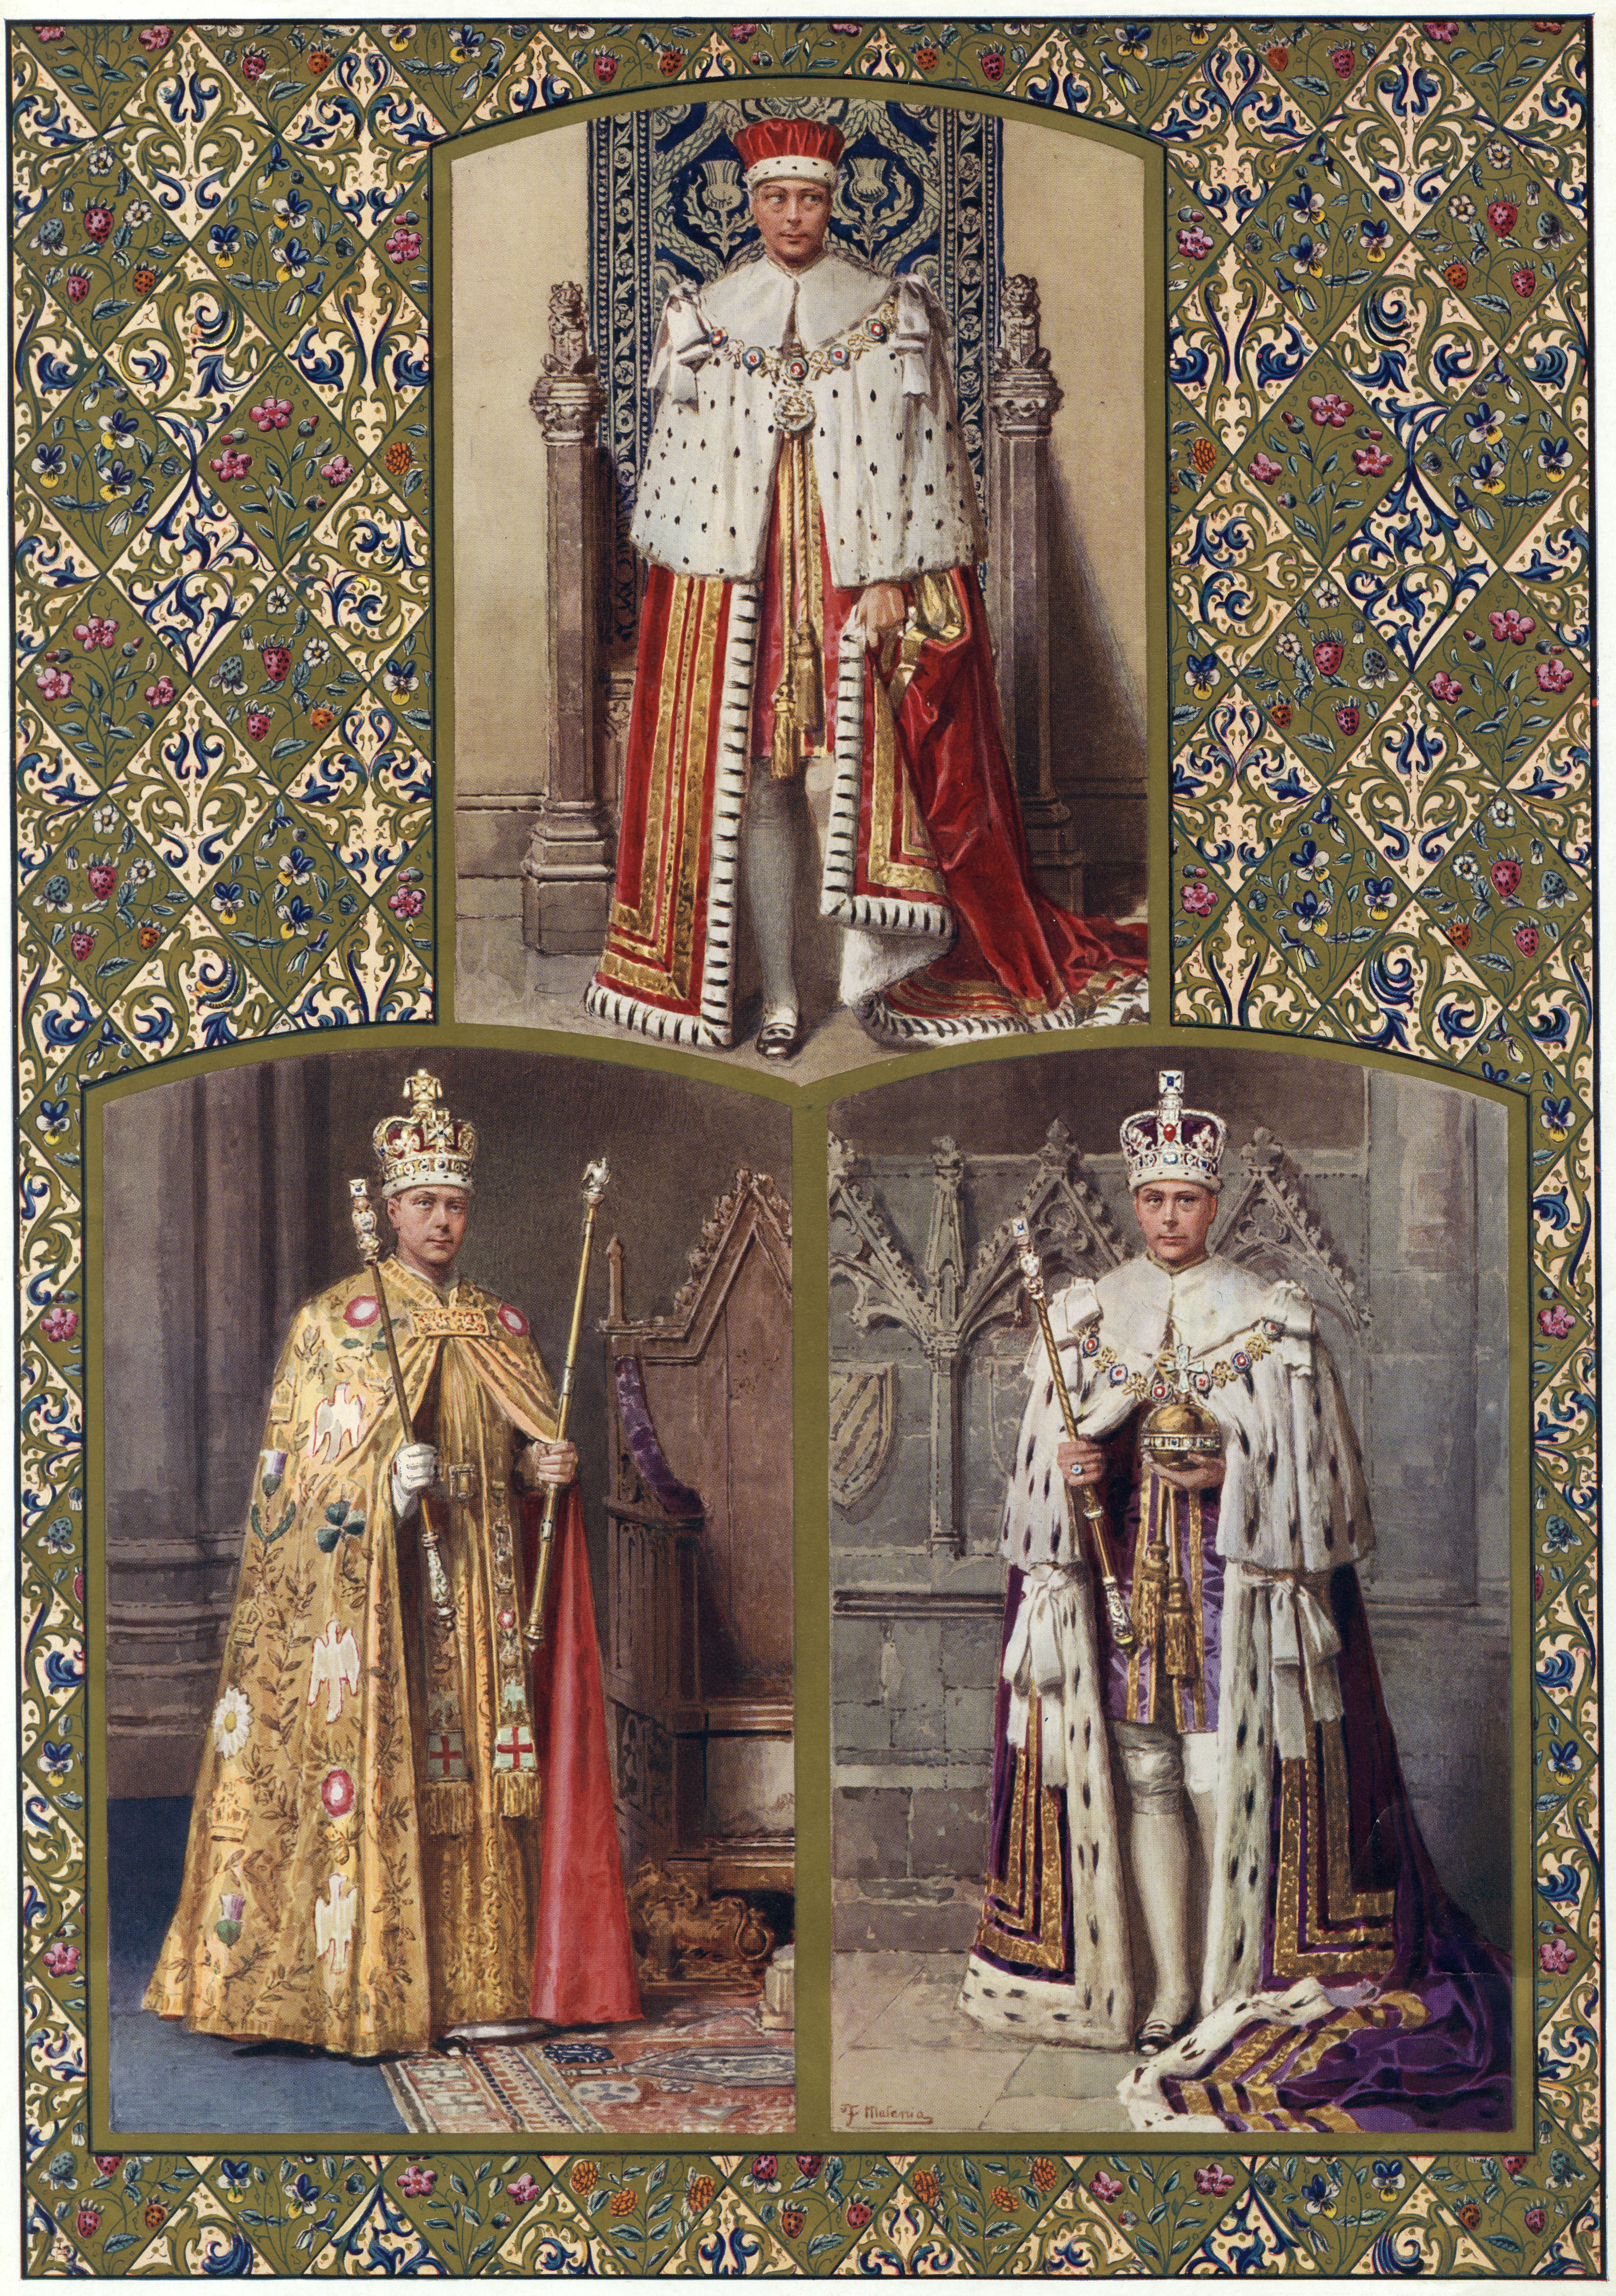 Royal photoshop - Triptych of Edward VIII in robes